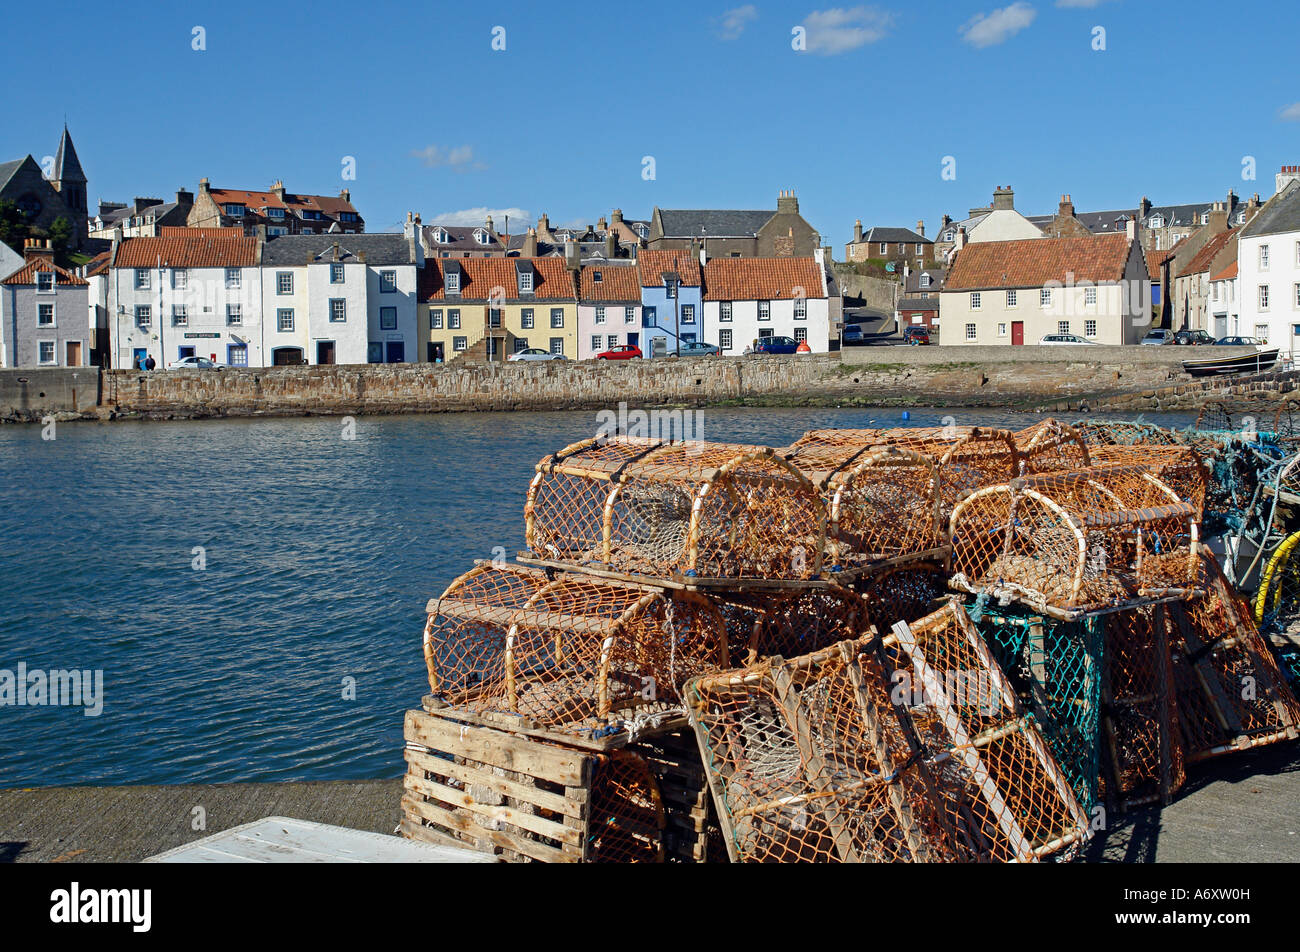 Fishing gear on a pier in St. Monans harbour in Fife Scotland with traditional colourful houses in the background. Stock Photo